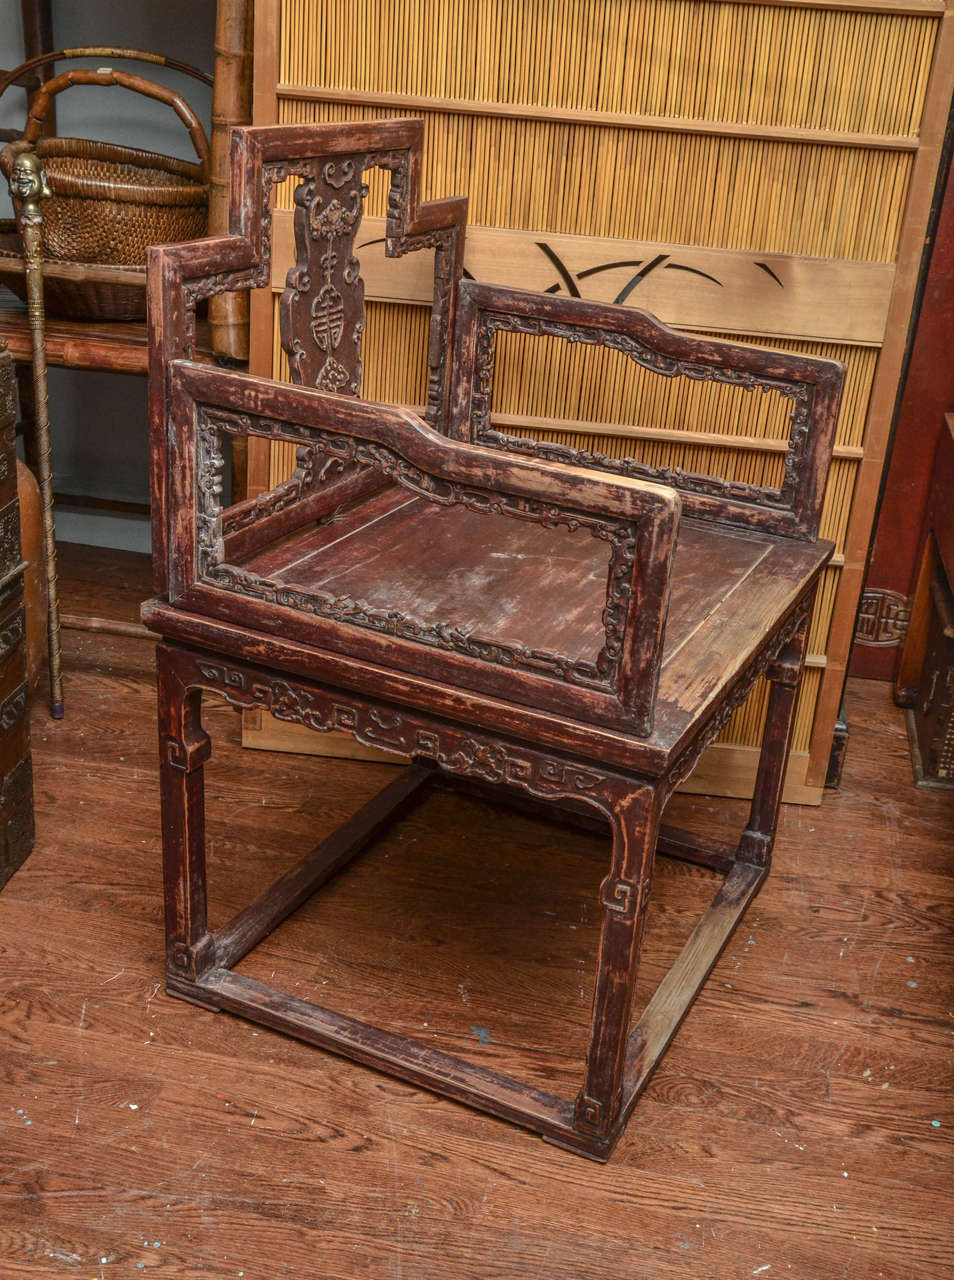 Early 19th century Qing dynasty Shanxi carved scholar's open armchair (pair available, priced and sold separately)
Each chair breaks down into four pieces.